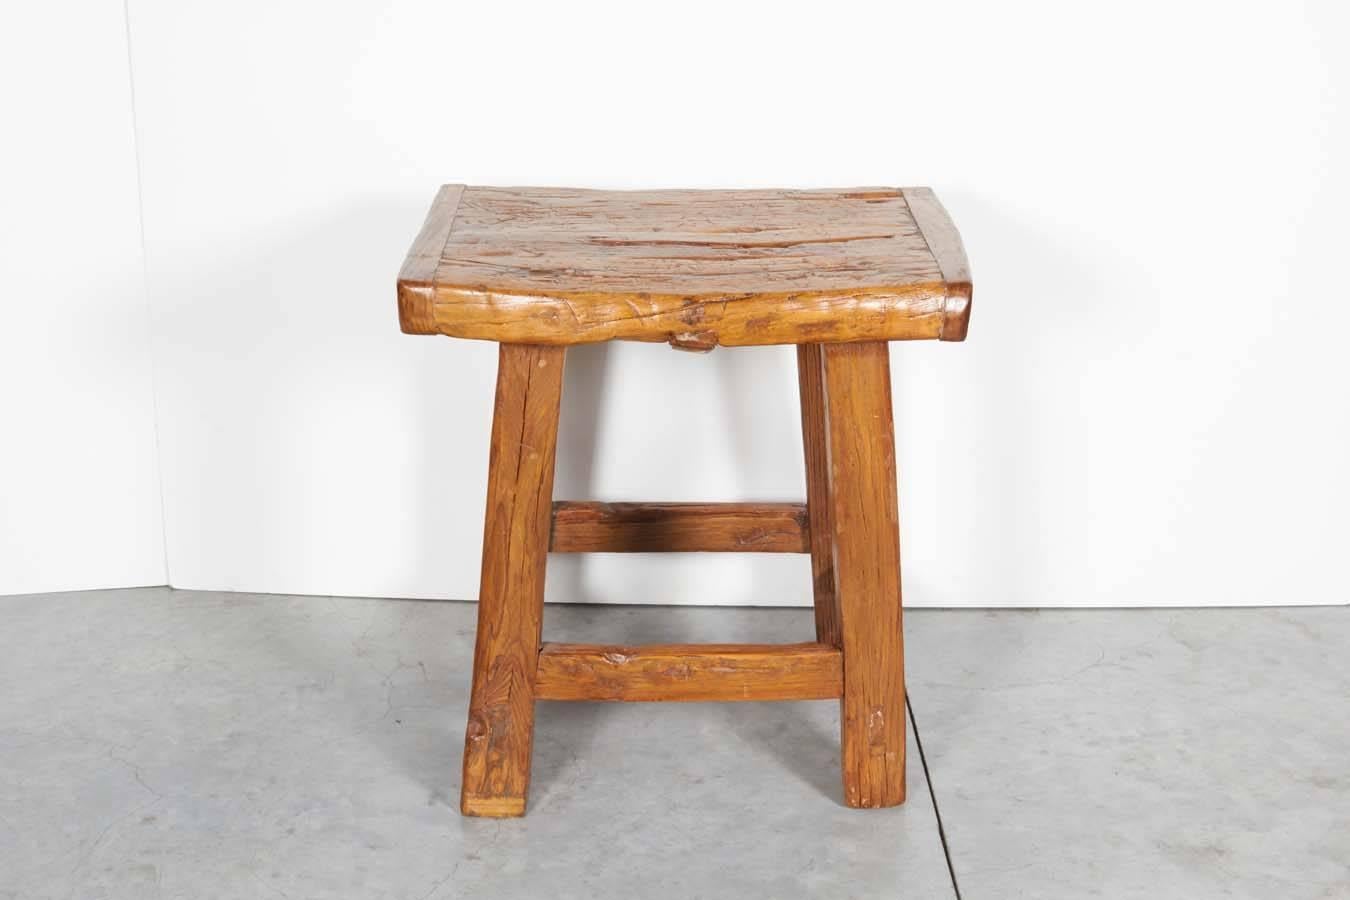 A large antique Chinese stool with a solid two inch thick seat, easily usable as a side table. Great patina. From Shanxi Province, circa 1900.
S488.